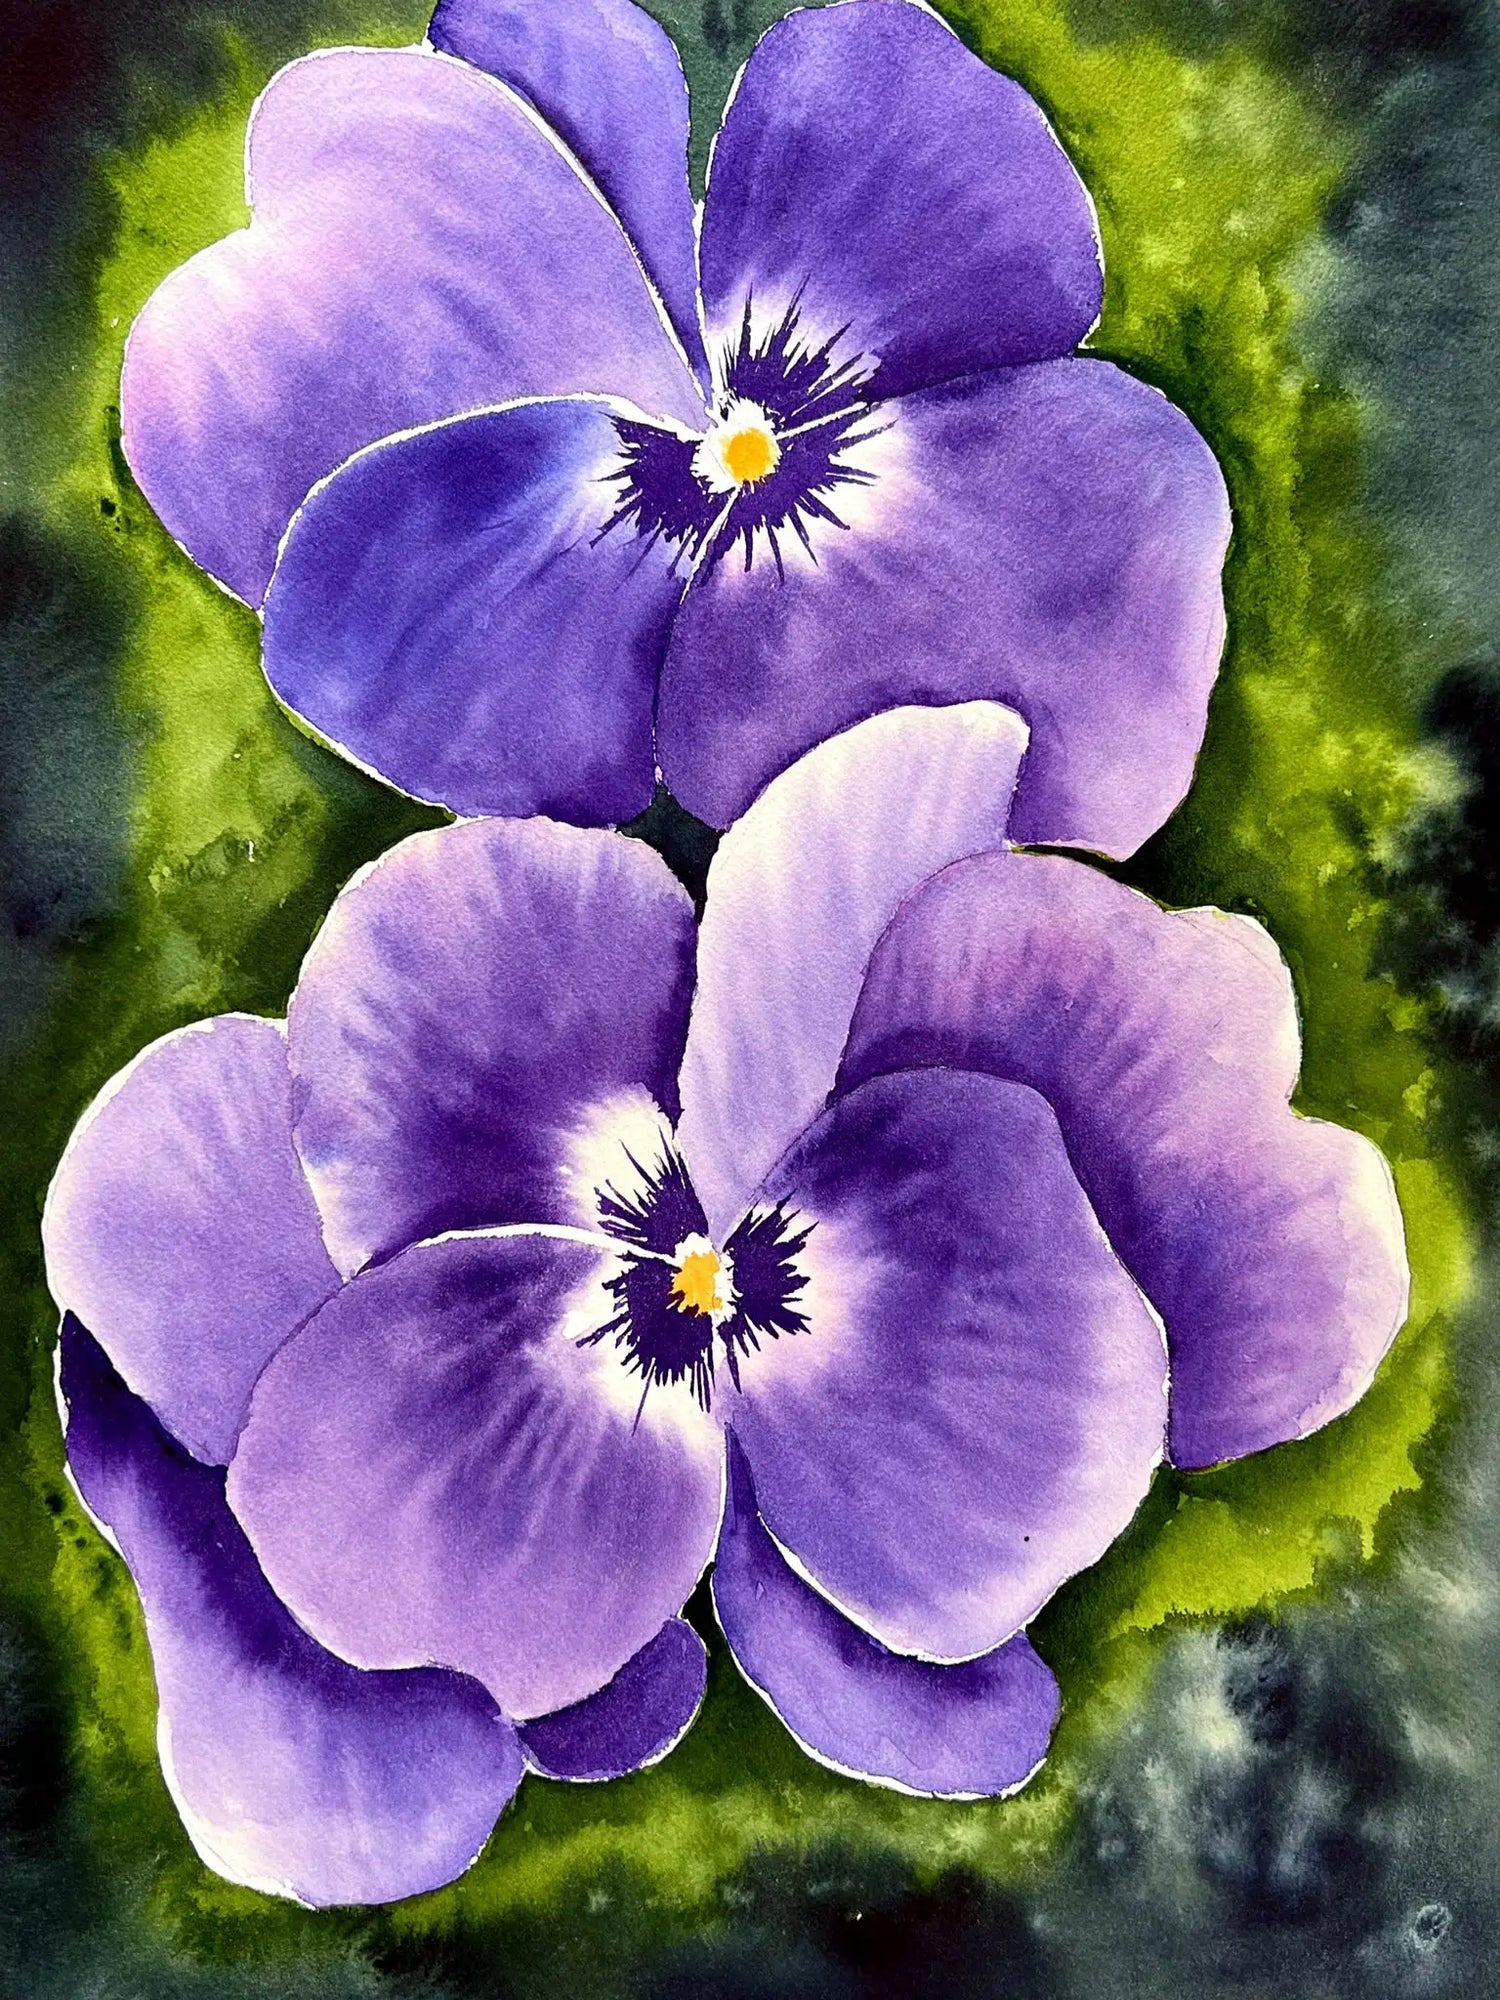 Master the Art of Painting Flowers: Watercolors vs Acrylics - A Step-by-Step Guide for Beginners